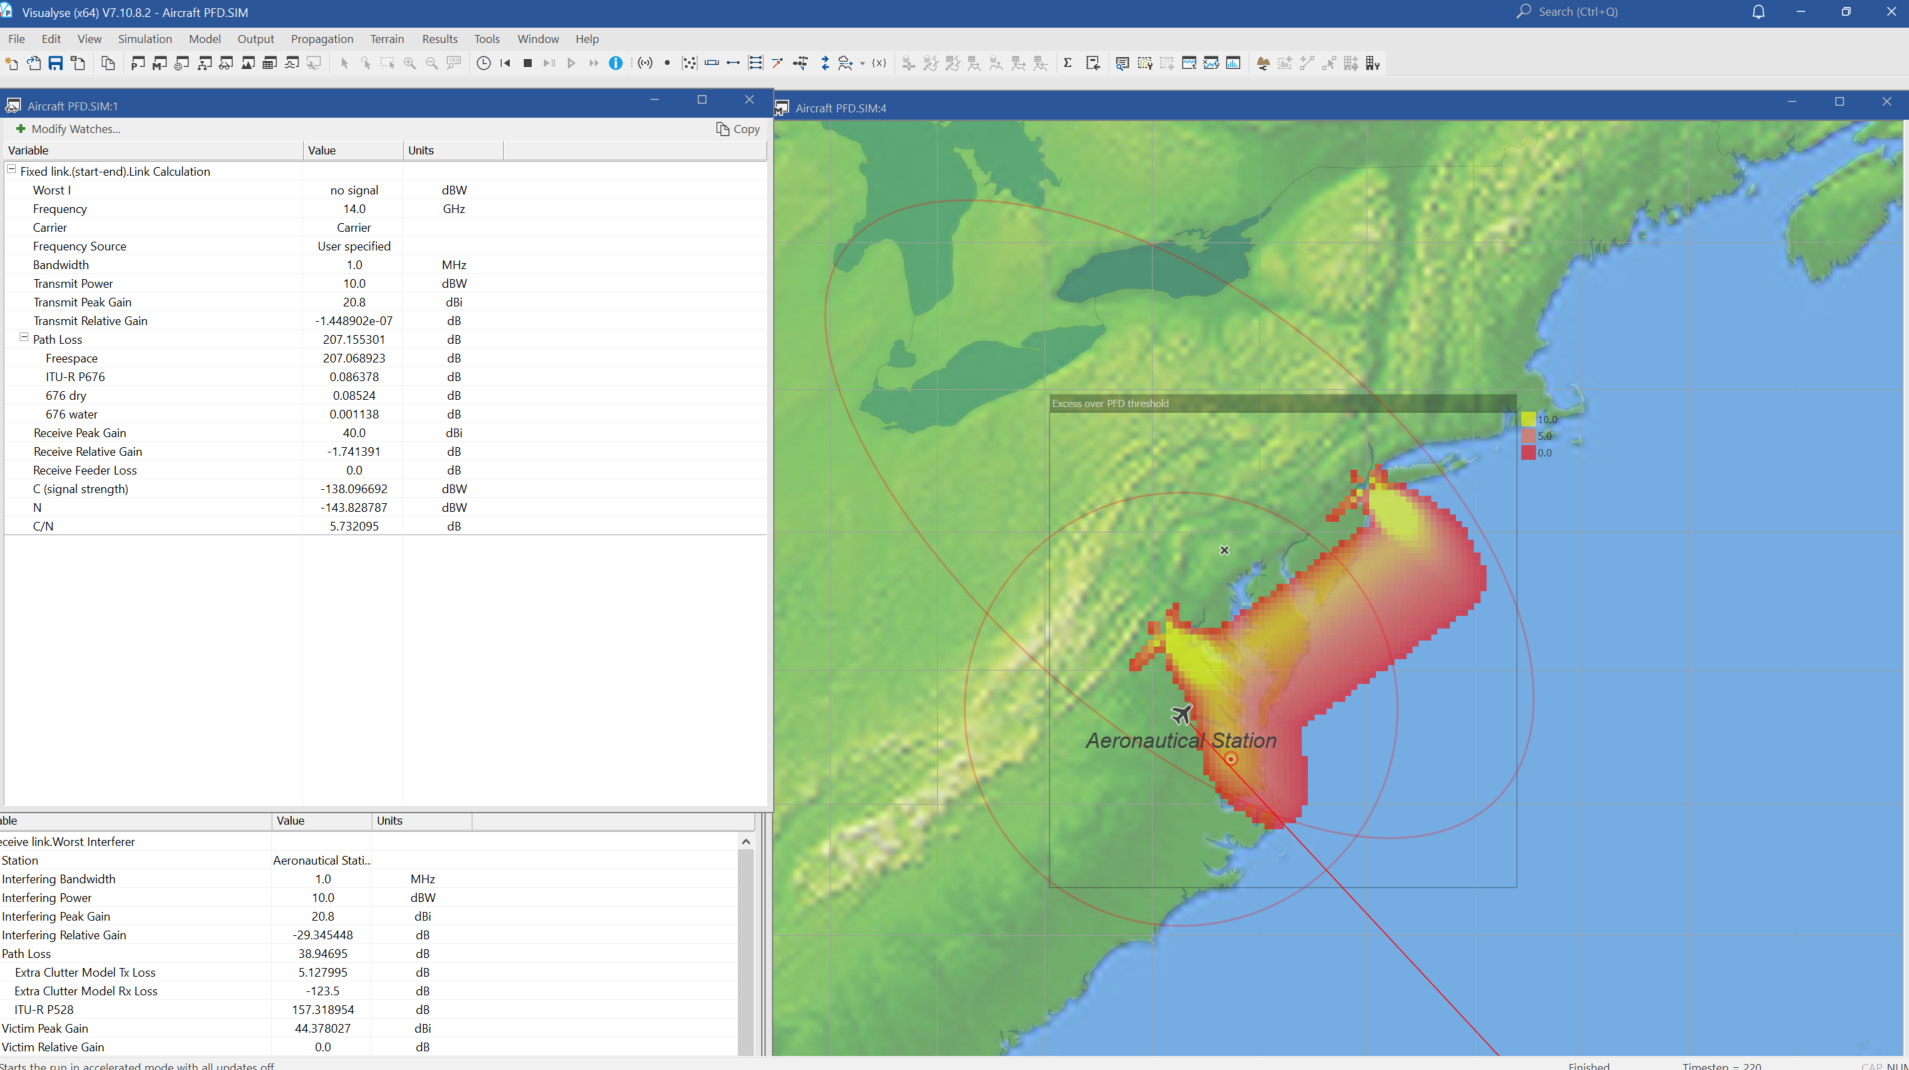 Area PFD Plots for an A-ESIM Travelling along a Coastline